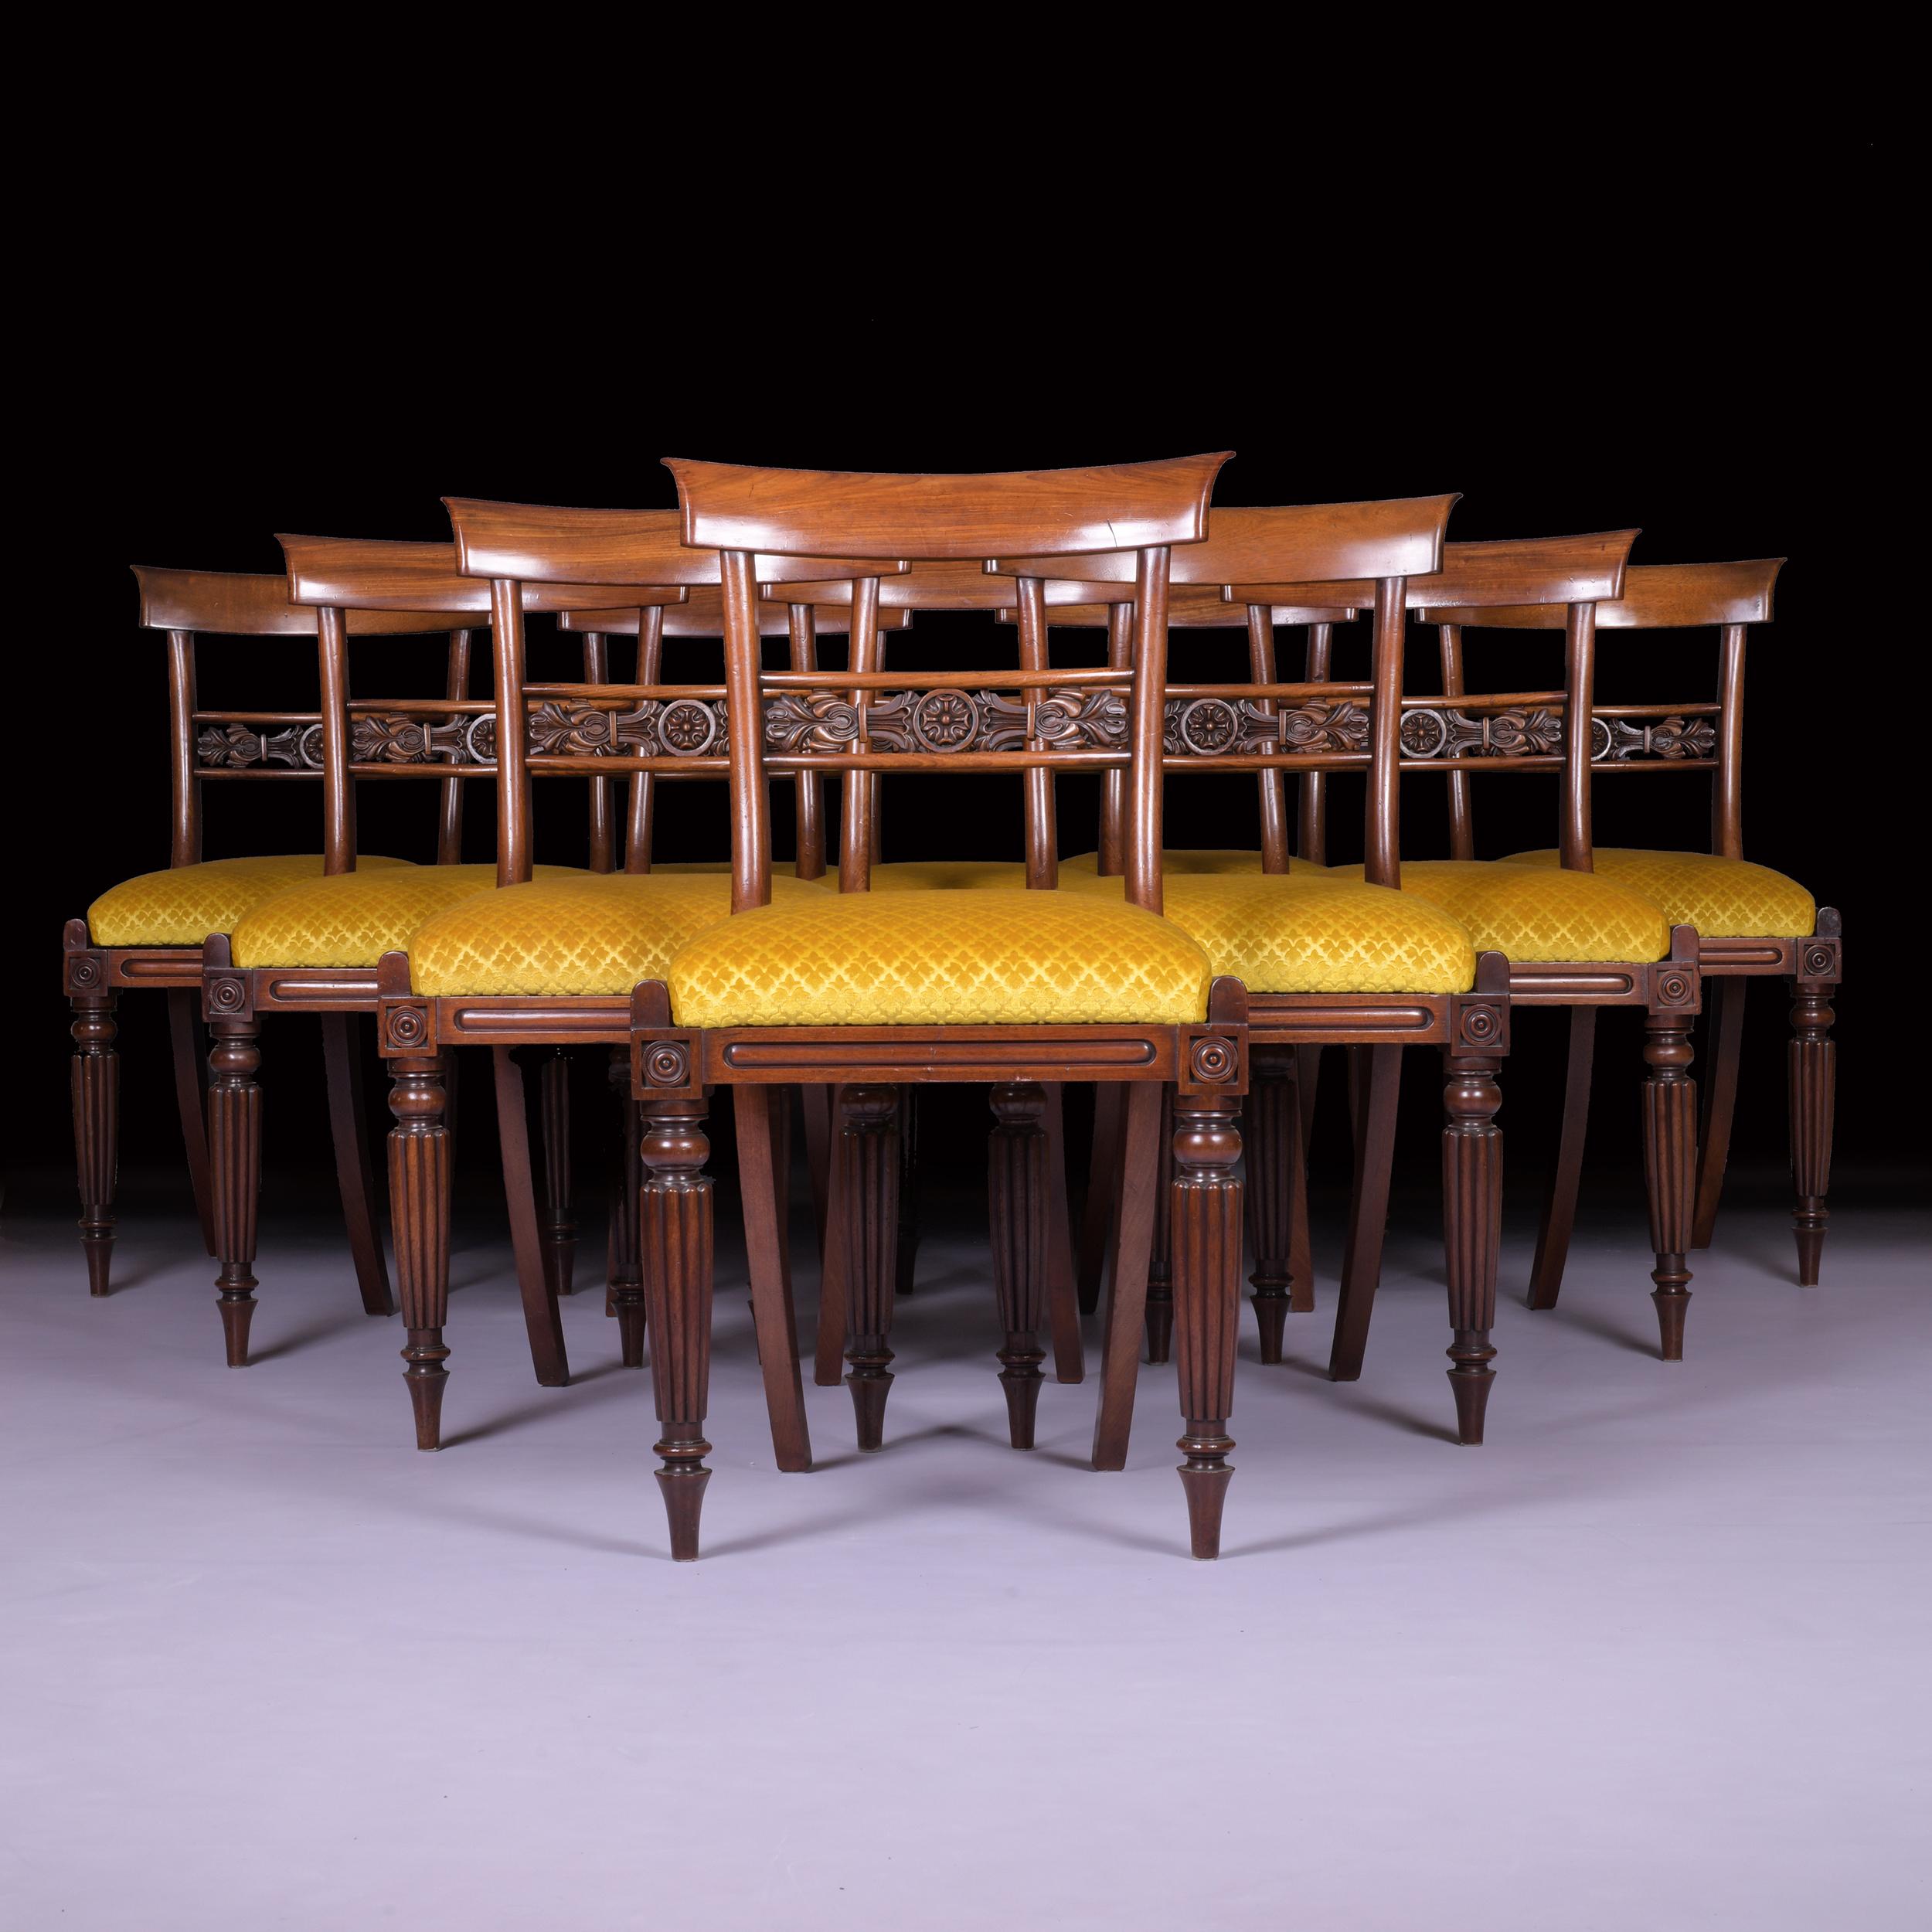 A superb quality set of 10 George IV Gancalo Alves dining room chairs with plain concave top rails, scroll moulded horizontal slats on reeded tapering legs with drop in seats upholstered in a very fine velvet material.

Circa 1828

English.